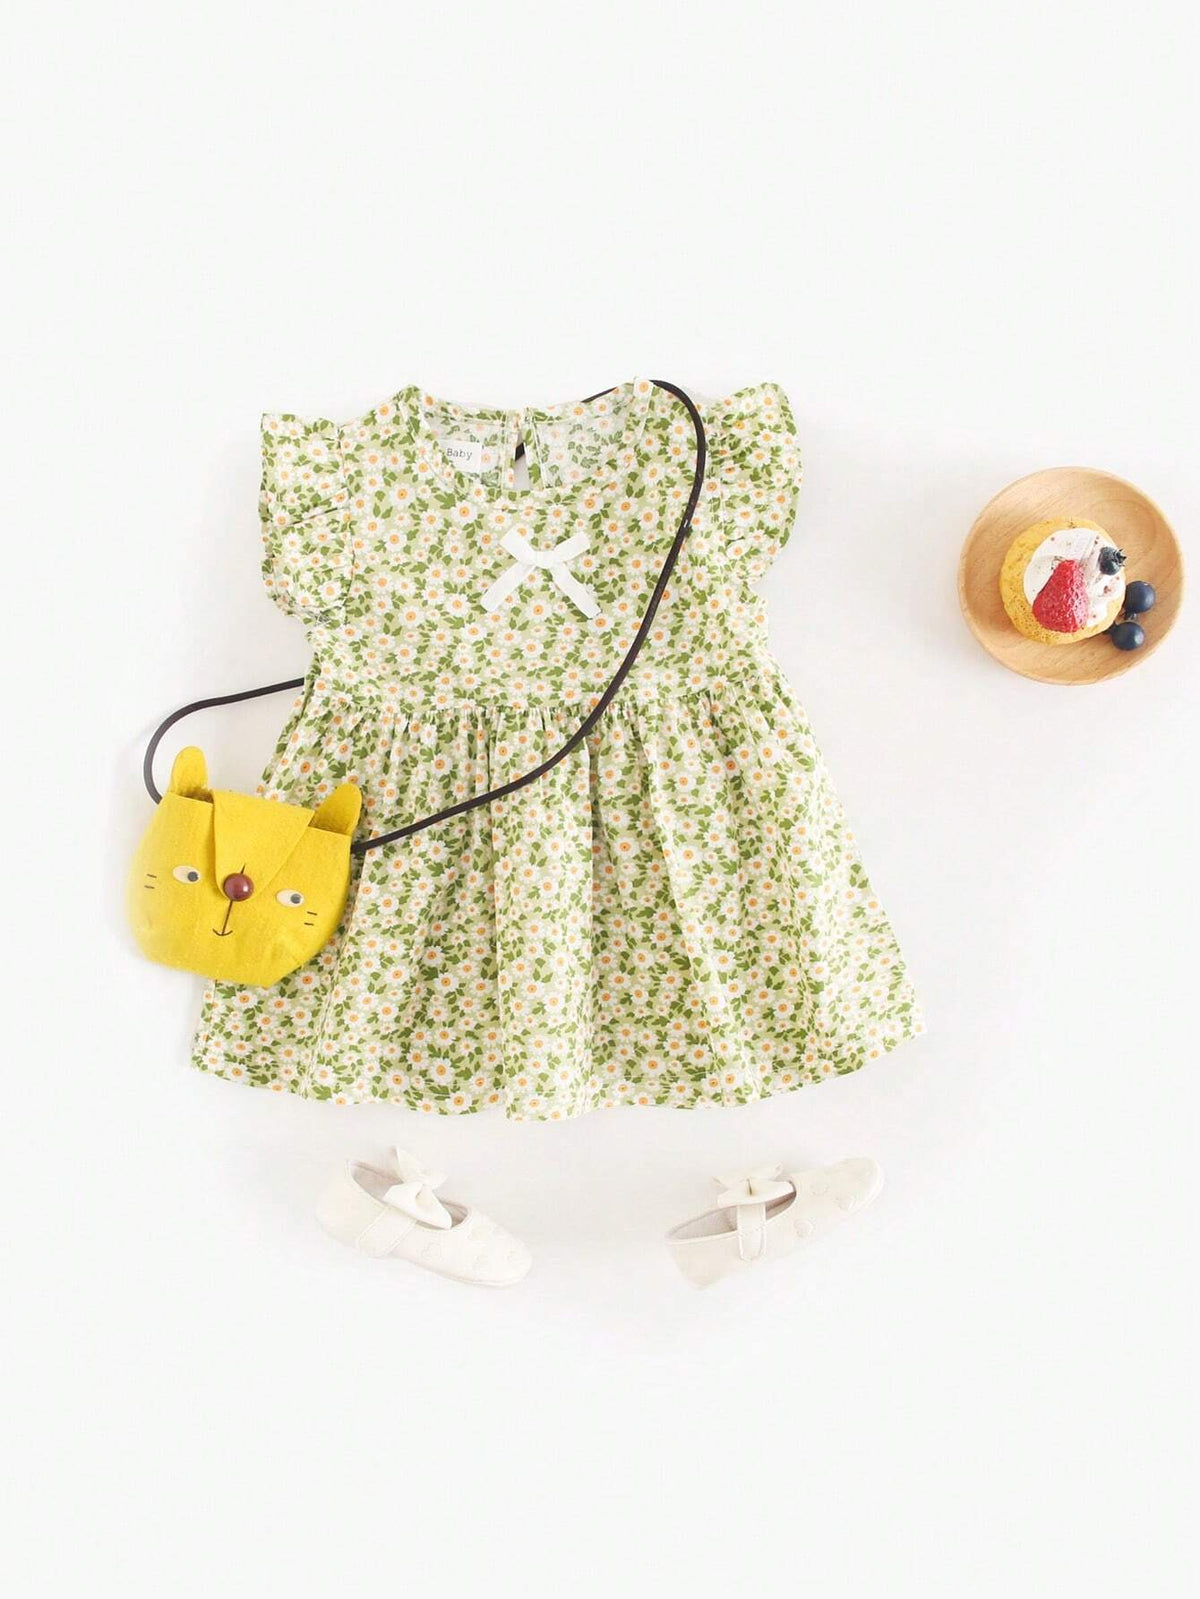 Toddler Girls" Comfortable Casual Floral Dress For Summer In Countryside Style